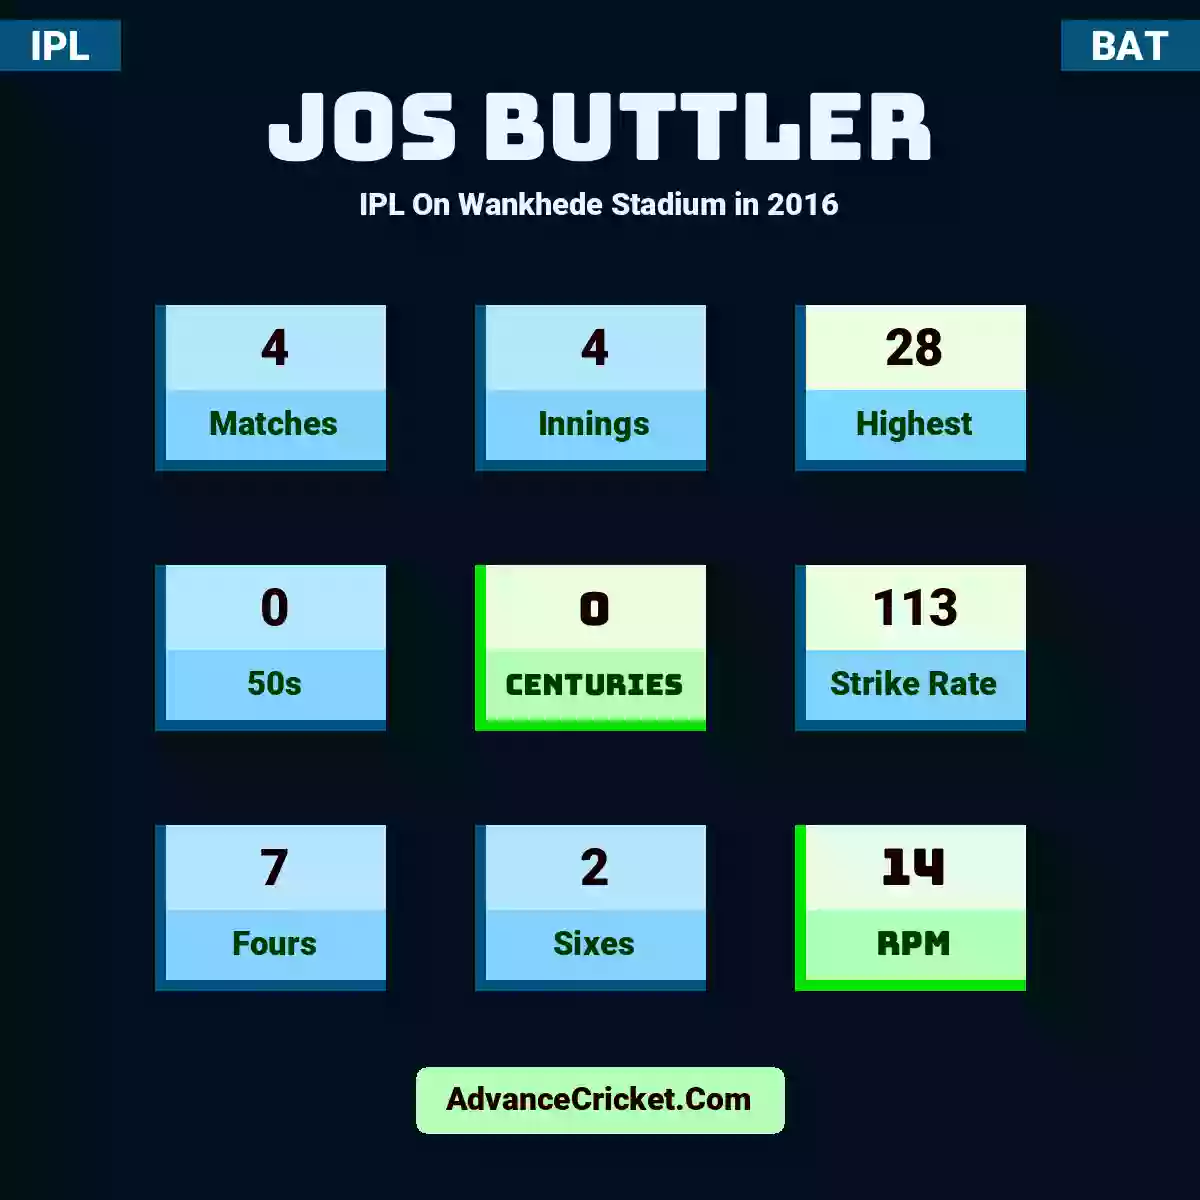 Jos Buttler IPL  On Wankhede Stadium in 2016, Jos Buttler played 4 matches, scored 28 runs as highest, 0 half-centuries, and 0 centuries, with a strike rate of 113. J.Buttler hit 7 fours and 2 sixes, with an RPM of 14.